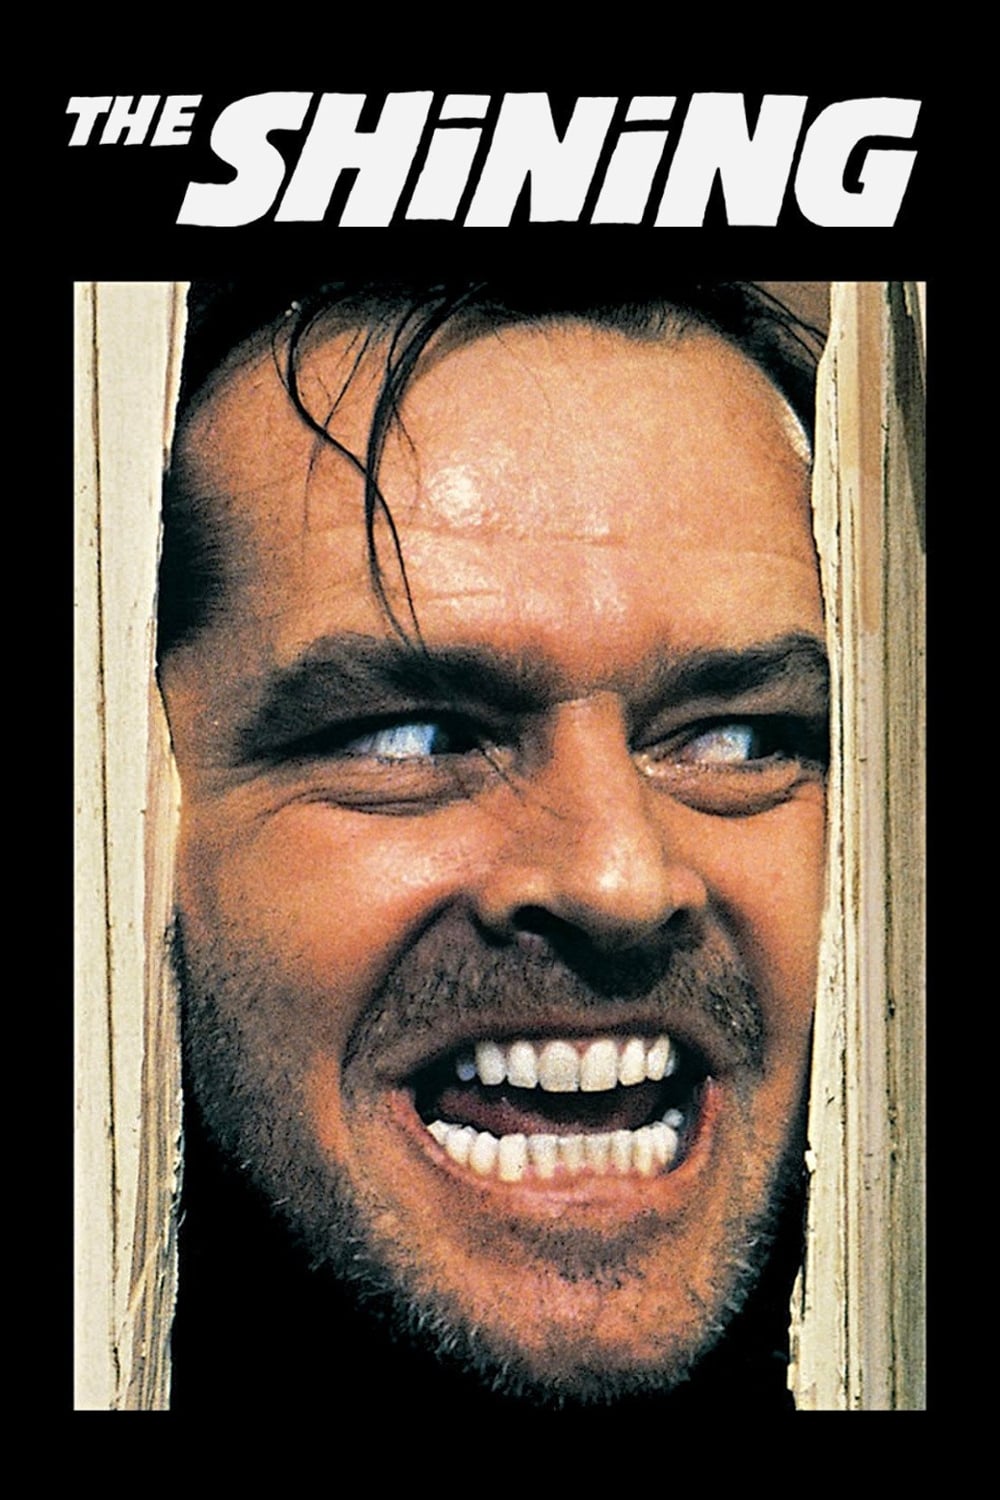 Poster for the movie "The Shining"